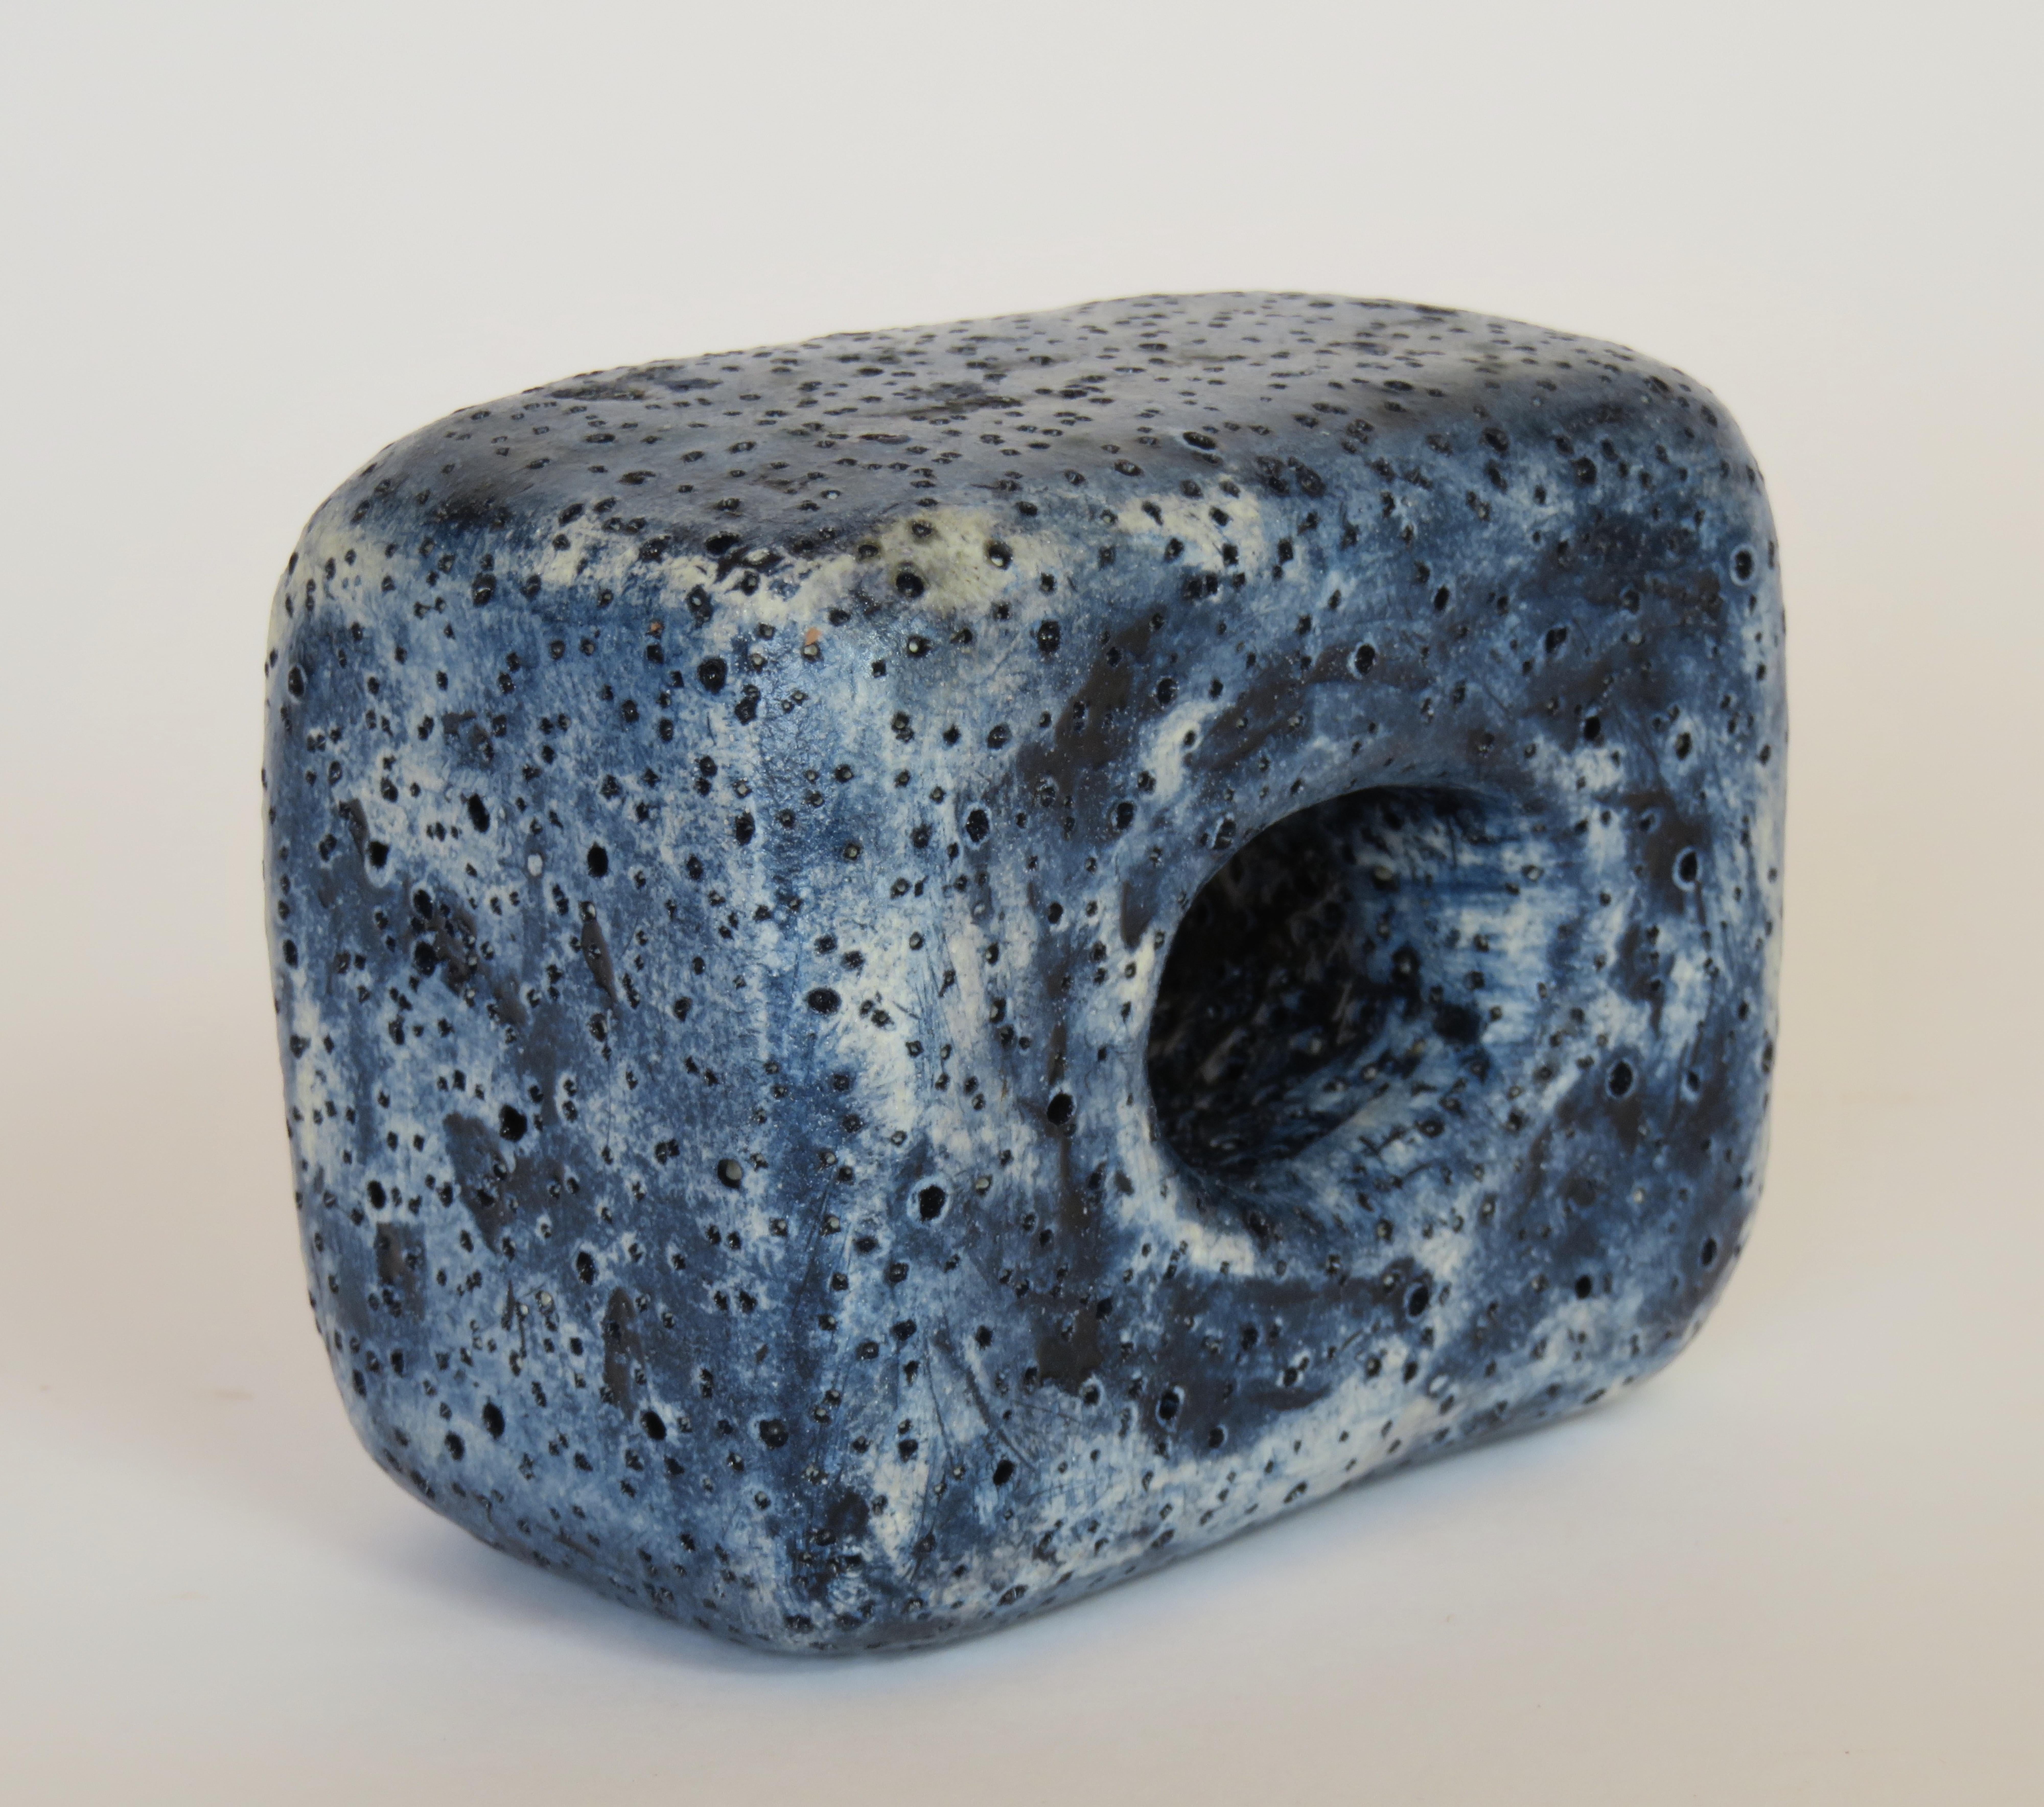 American Hand Textured Ceramic Sculpture, Oblong Cube with Oval Opening in Deep Blue Wash